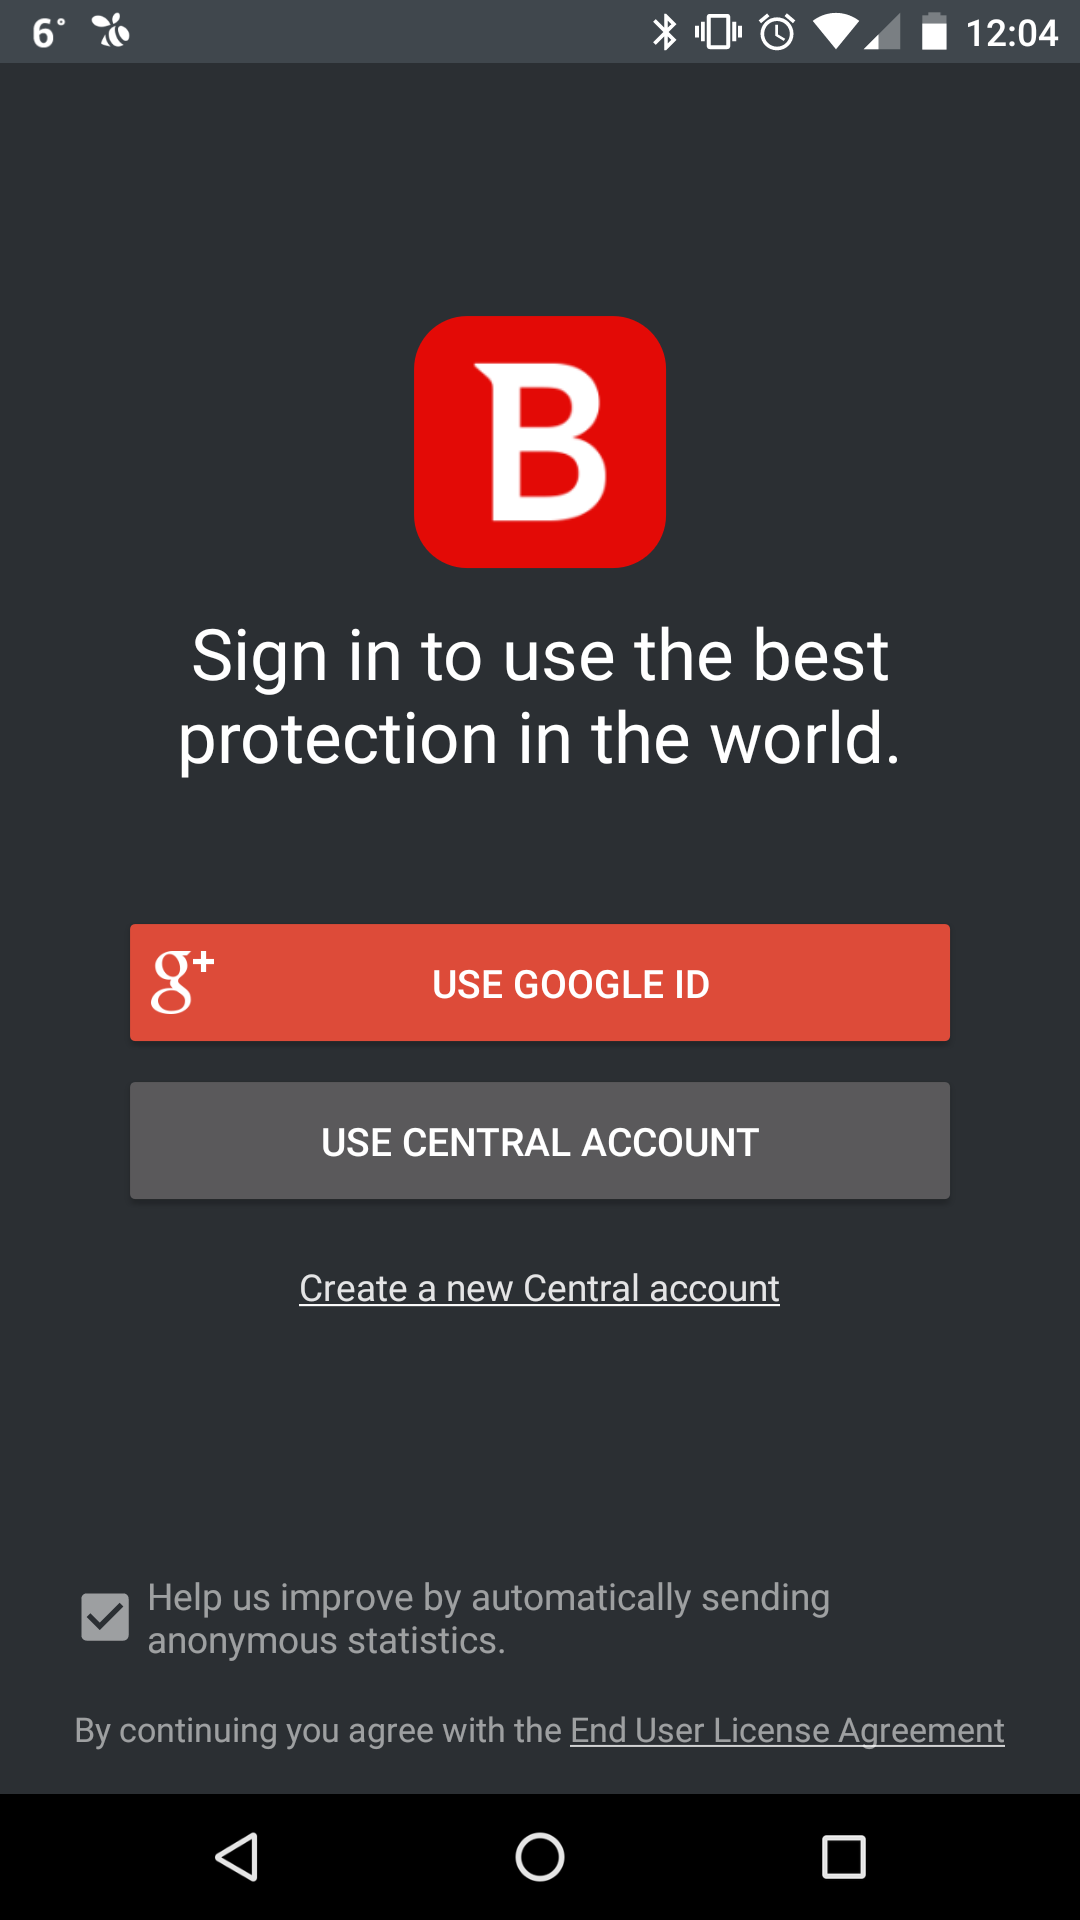 bitdefender for android phones